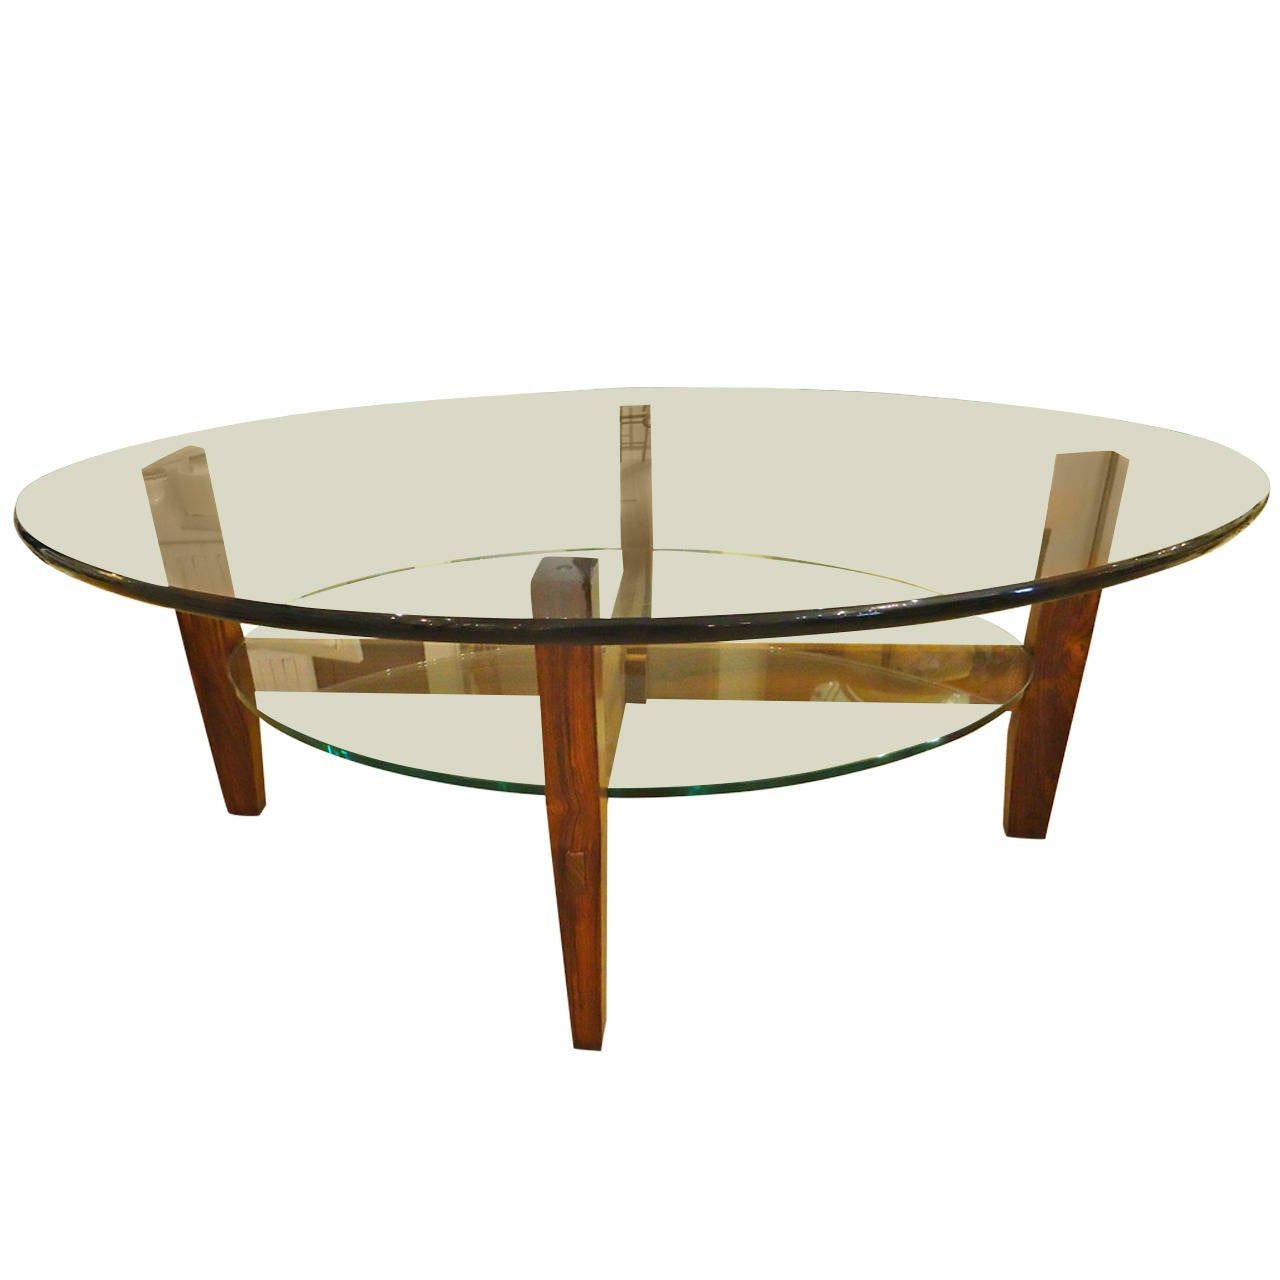 Two Tier Rosewood And Oval Glass Coffee Cocktail Table At Within Most Popular Glass And Pewter Oval Coffee Tables (View 8 of 20)